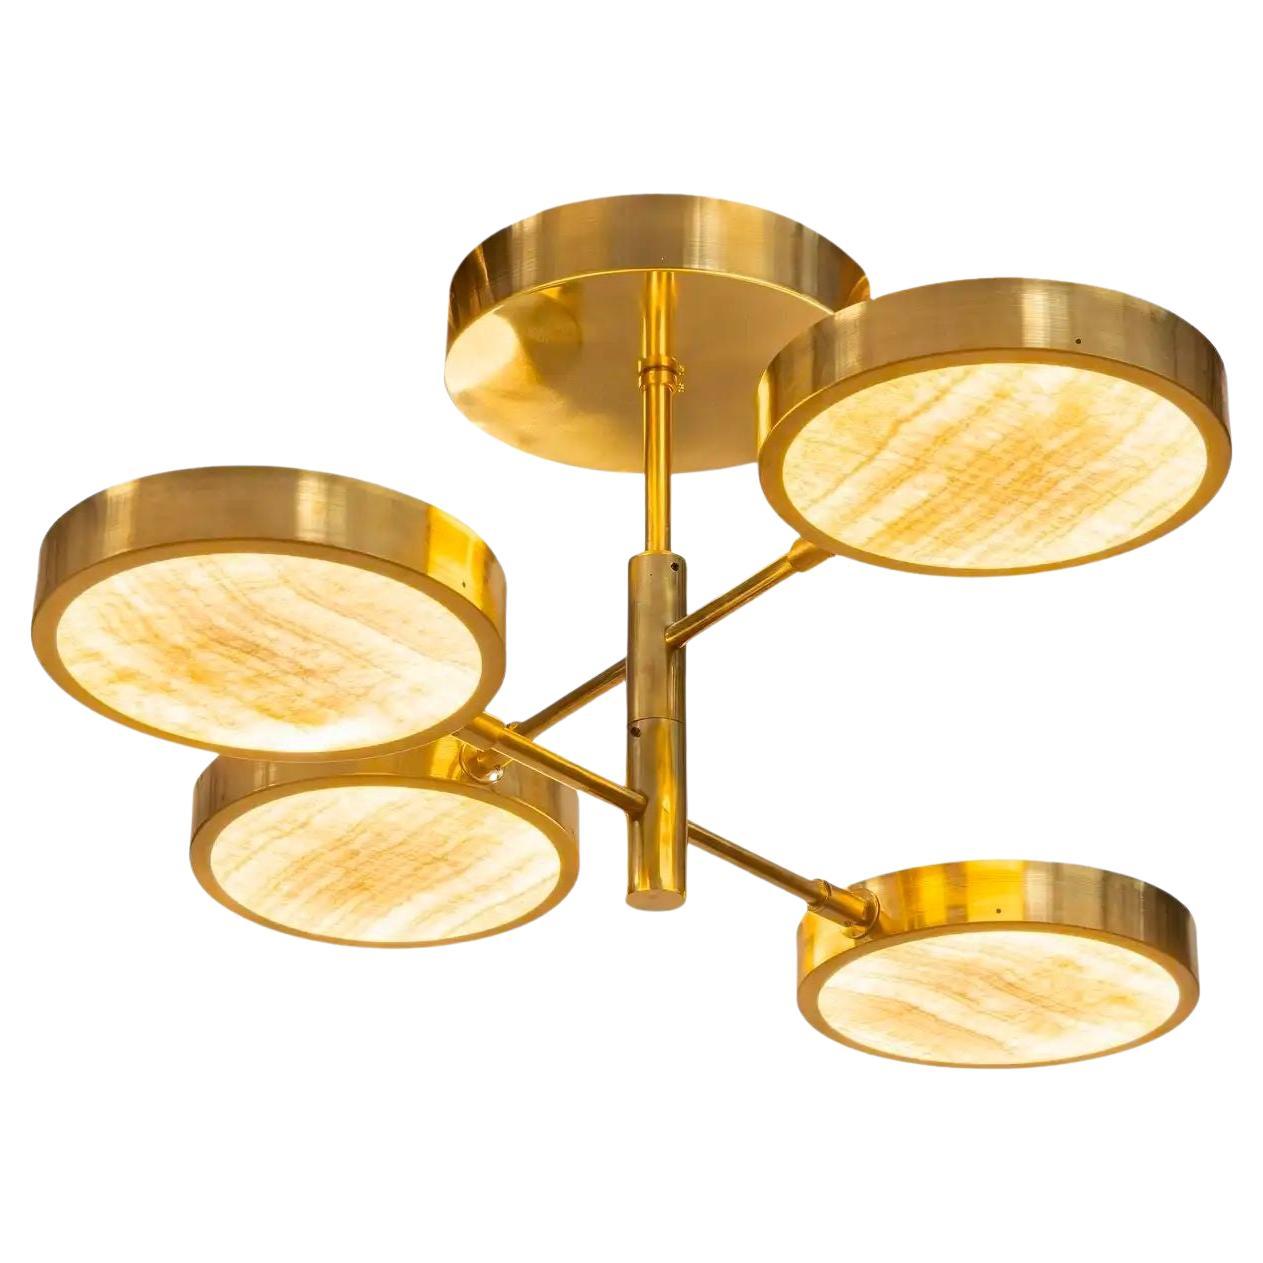 Sistema Solare Chandelier, Piattelli Design, Ivory-toned Onyx and Brass, 4-shade For Sale